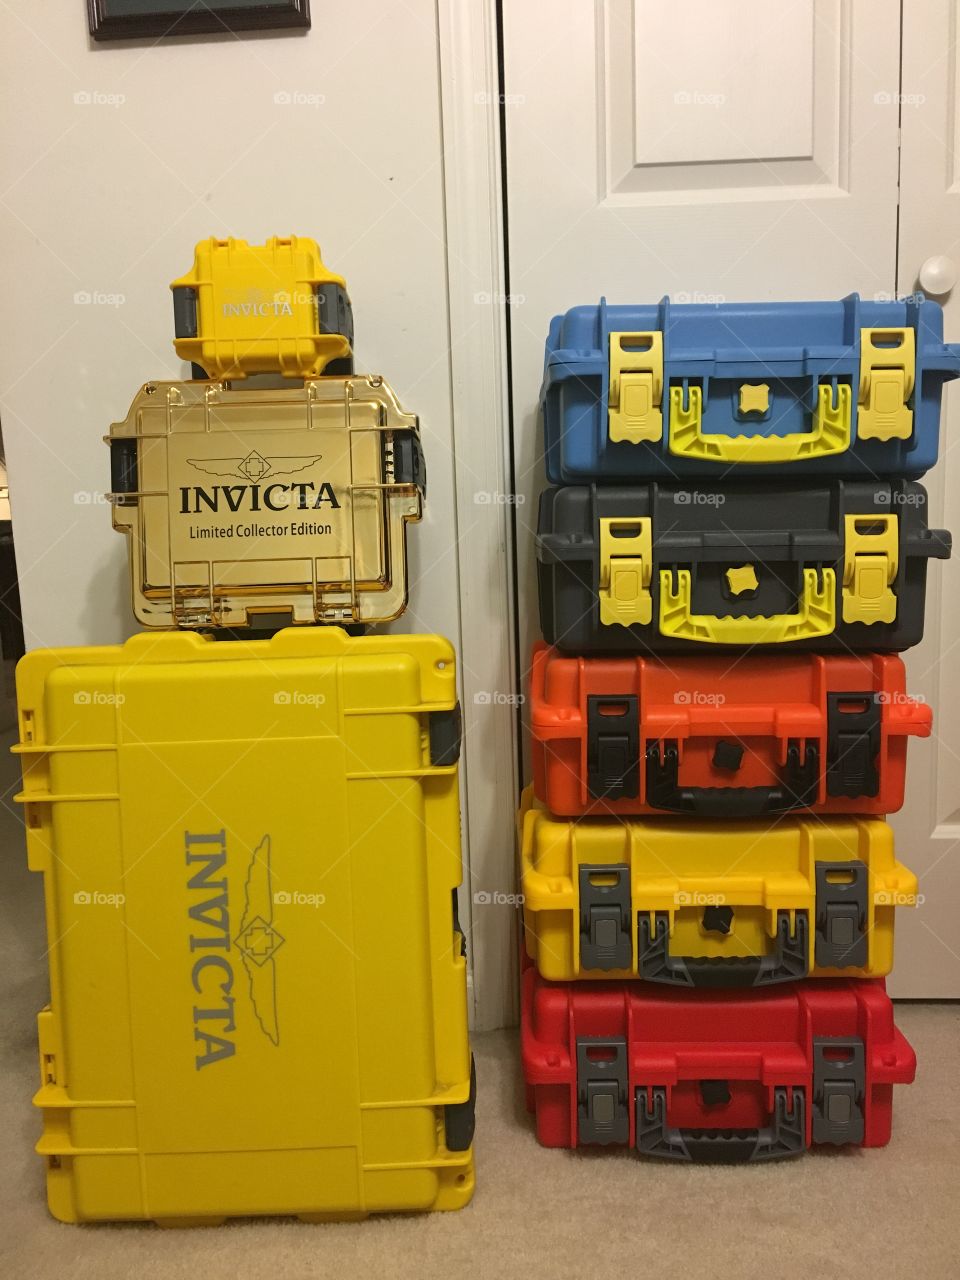 Invicta watches were on the top of my husbands “Get items to safety” list for the Hurrican Irma 🙈🤷‍♀️